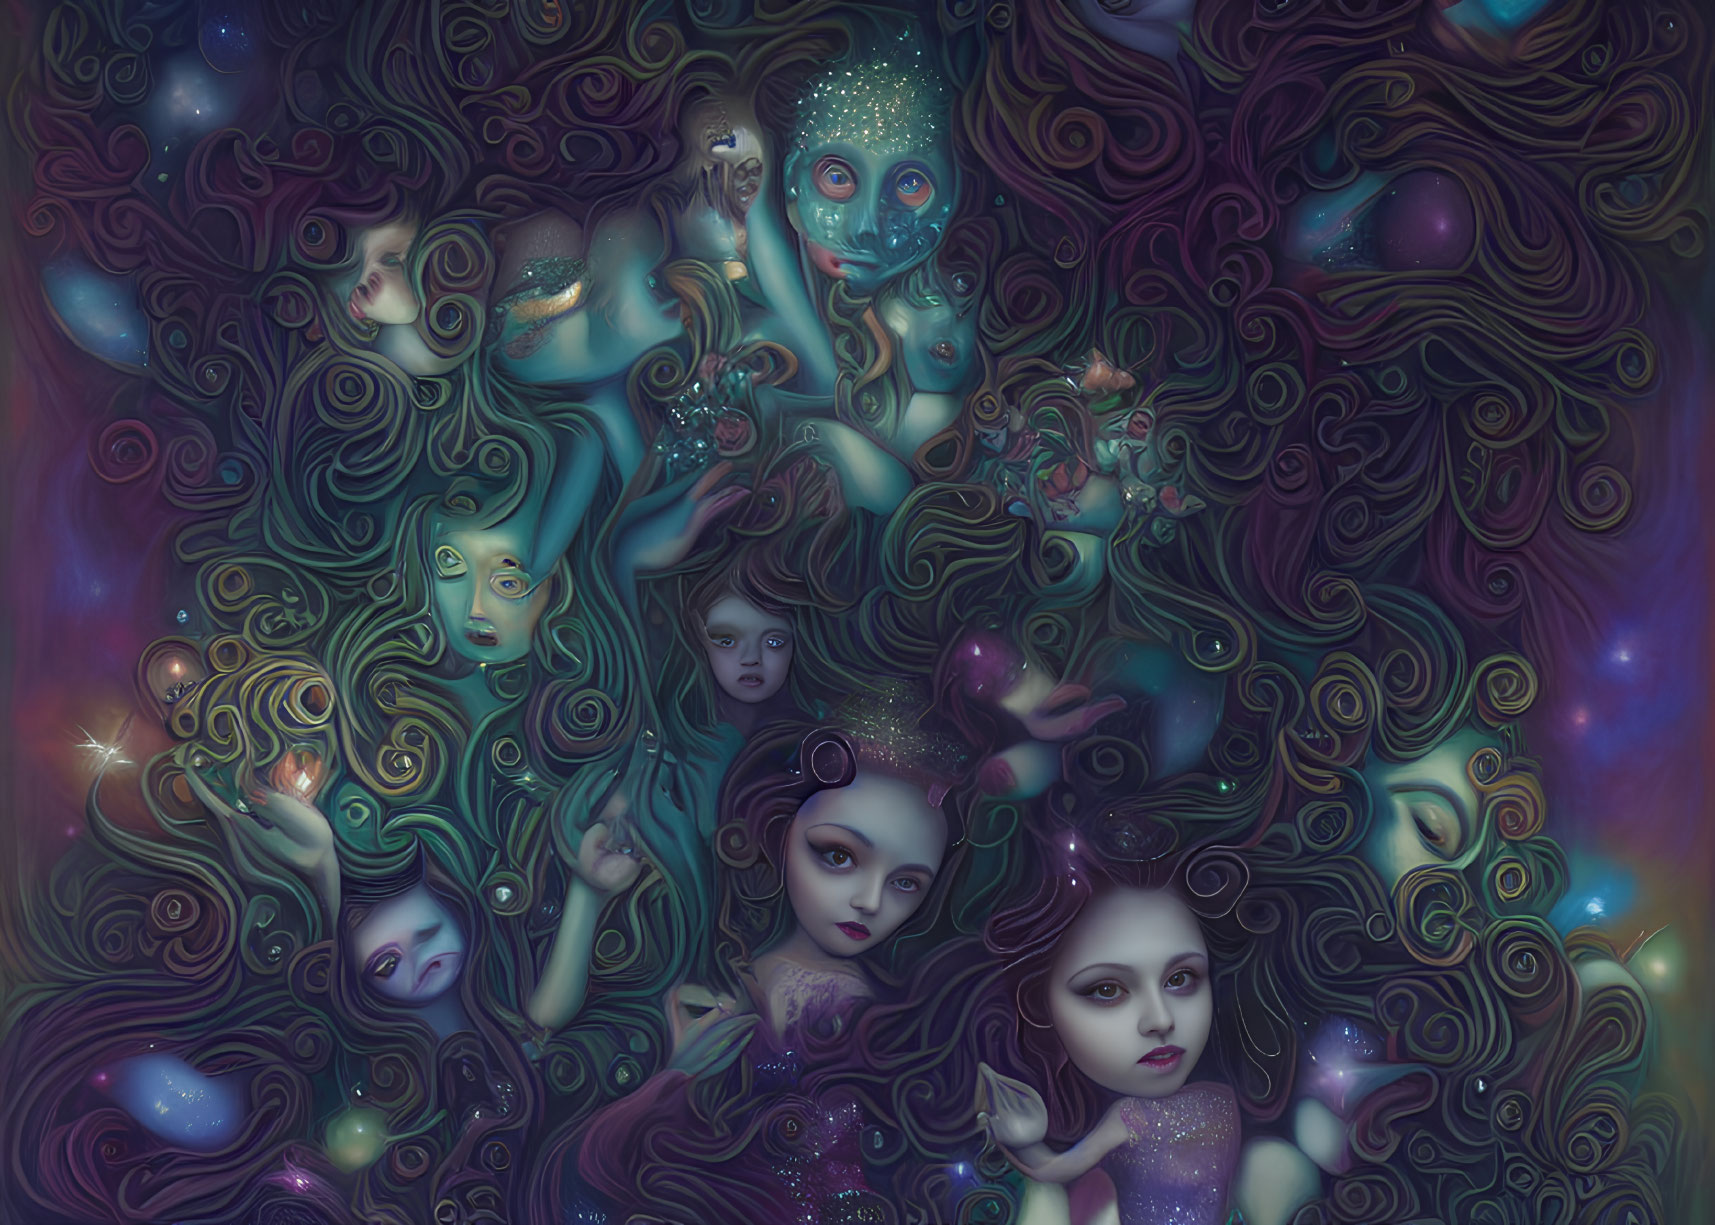 Mystical artwork with ethereal faces and cosmic elements on dark background